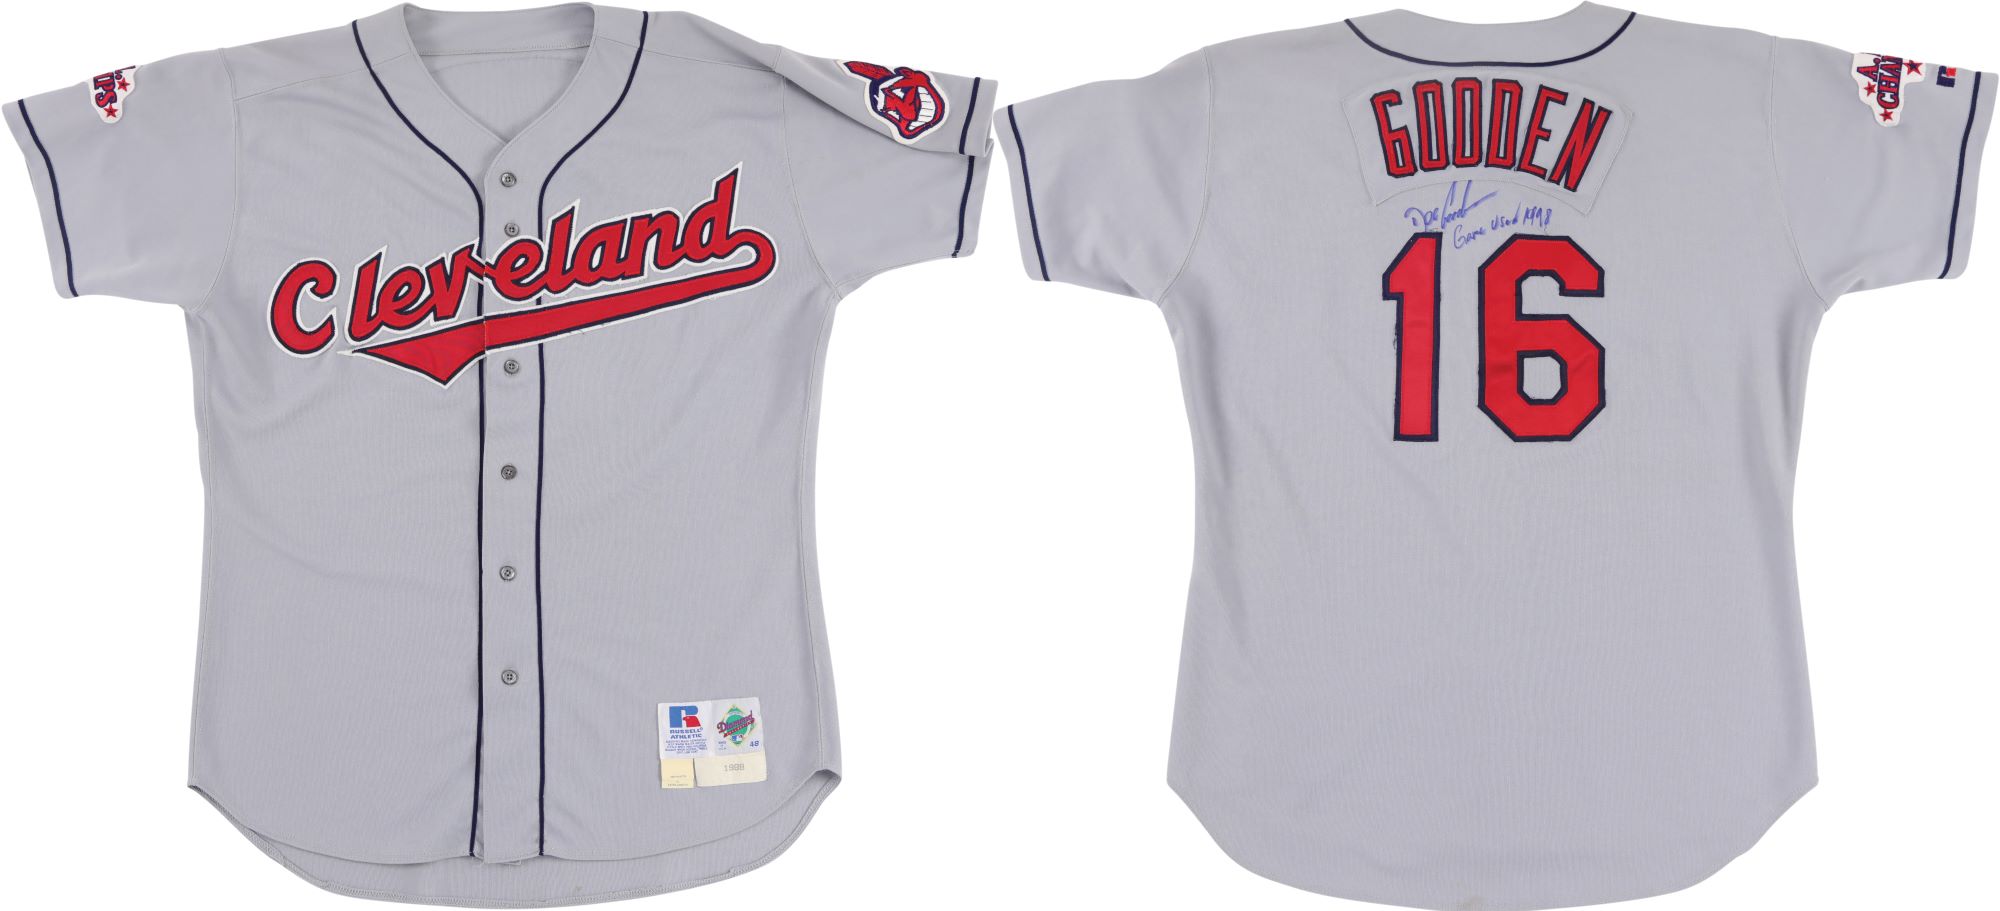 cleveland away jersey Cheap Sell - OFF 52%